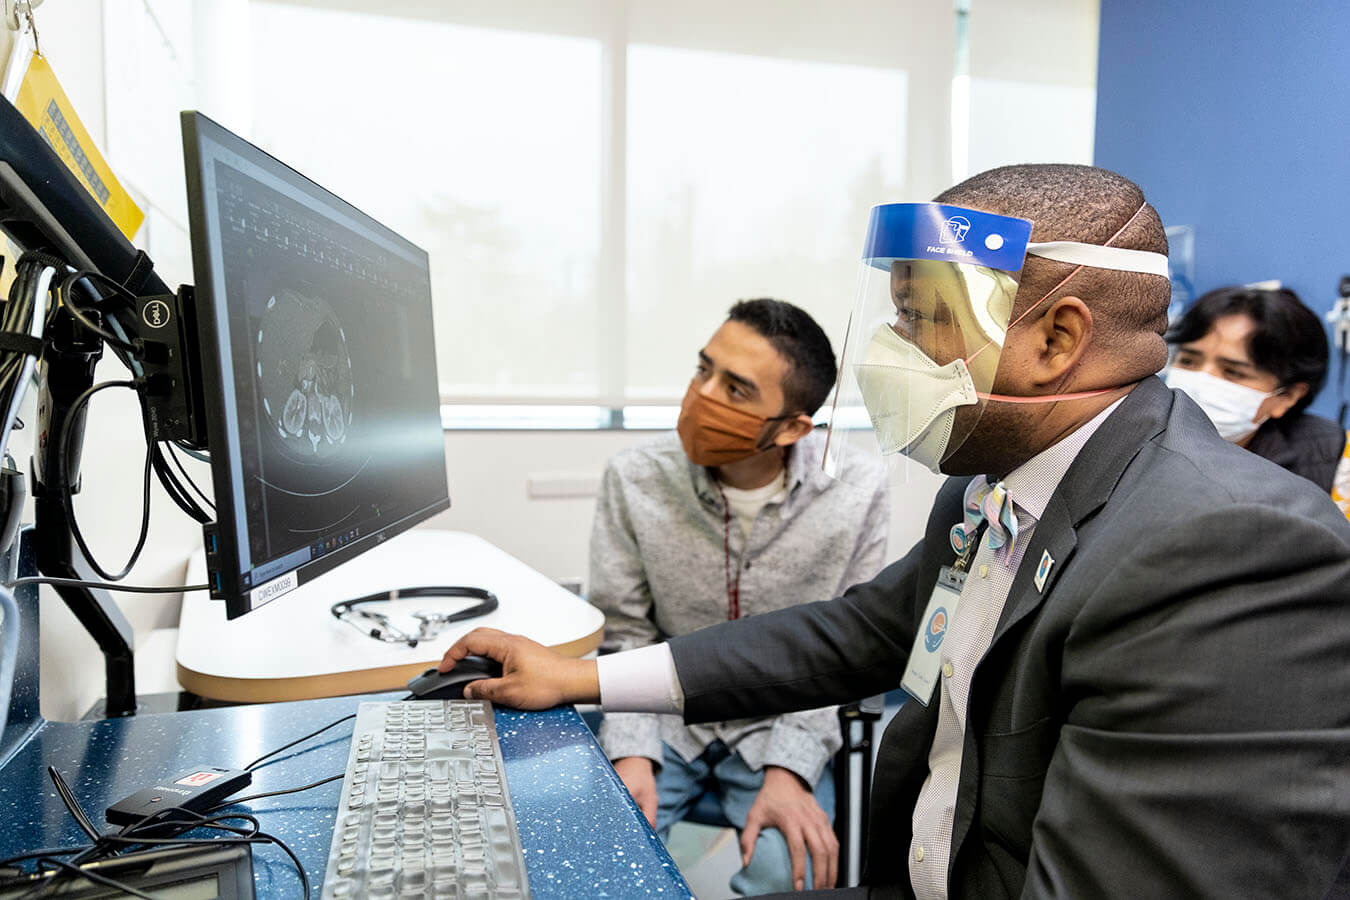 Dr. André Dick and patients examine a medical scan on a computer screen